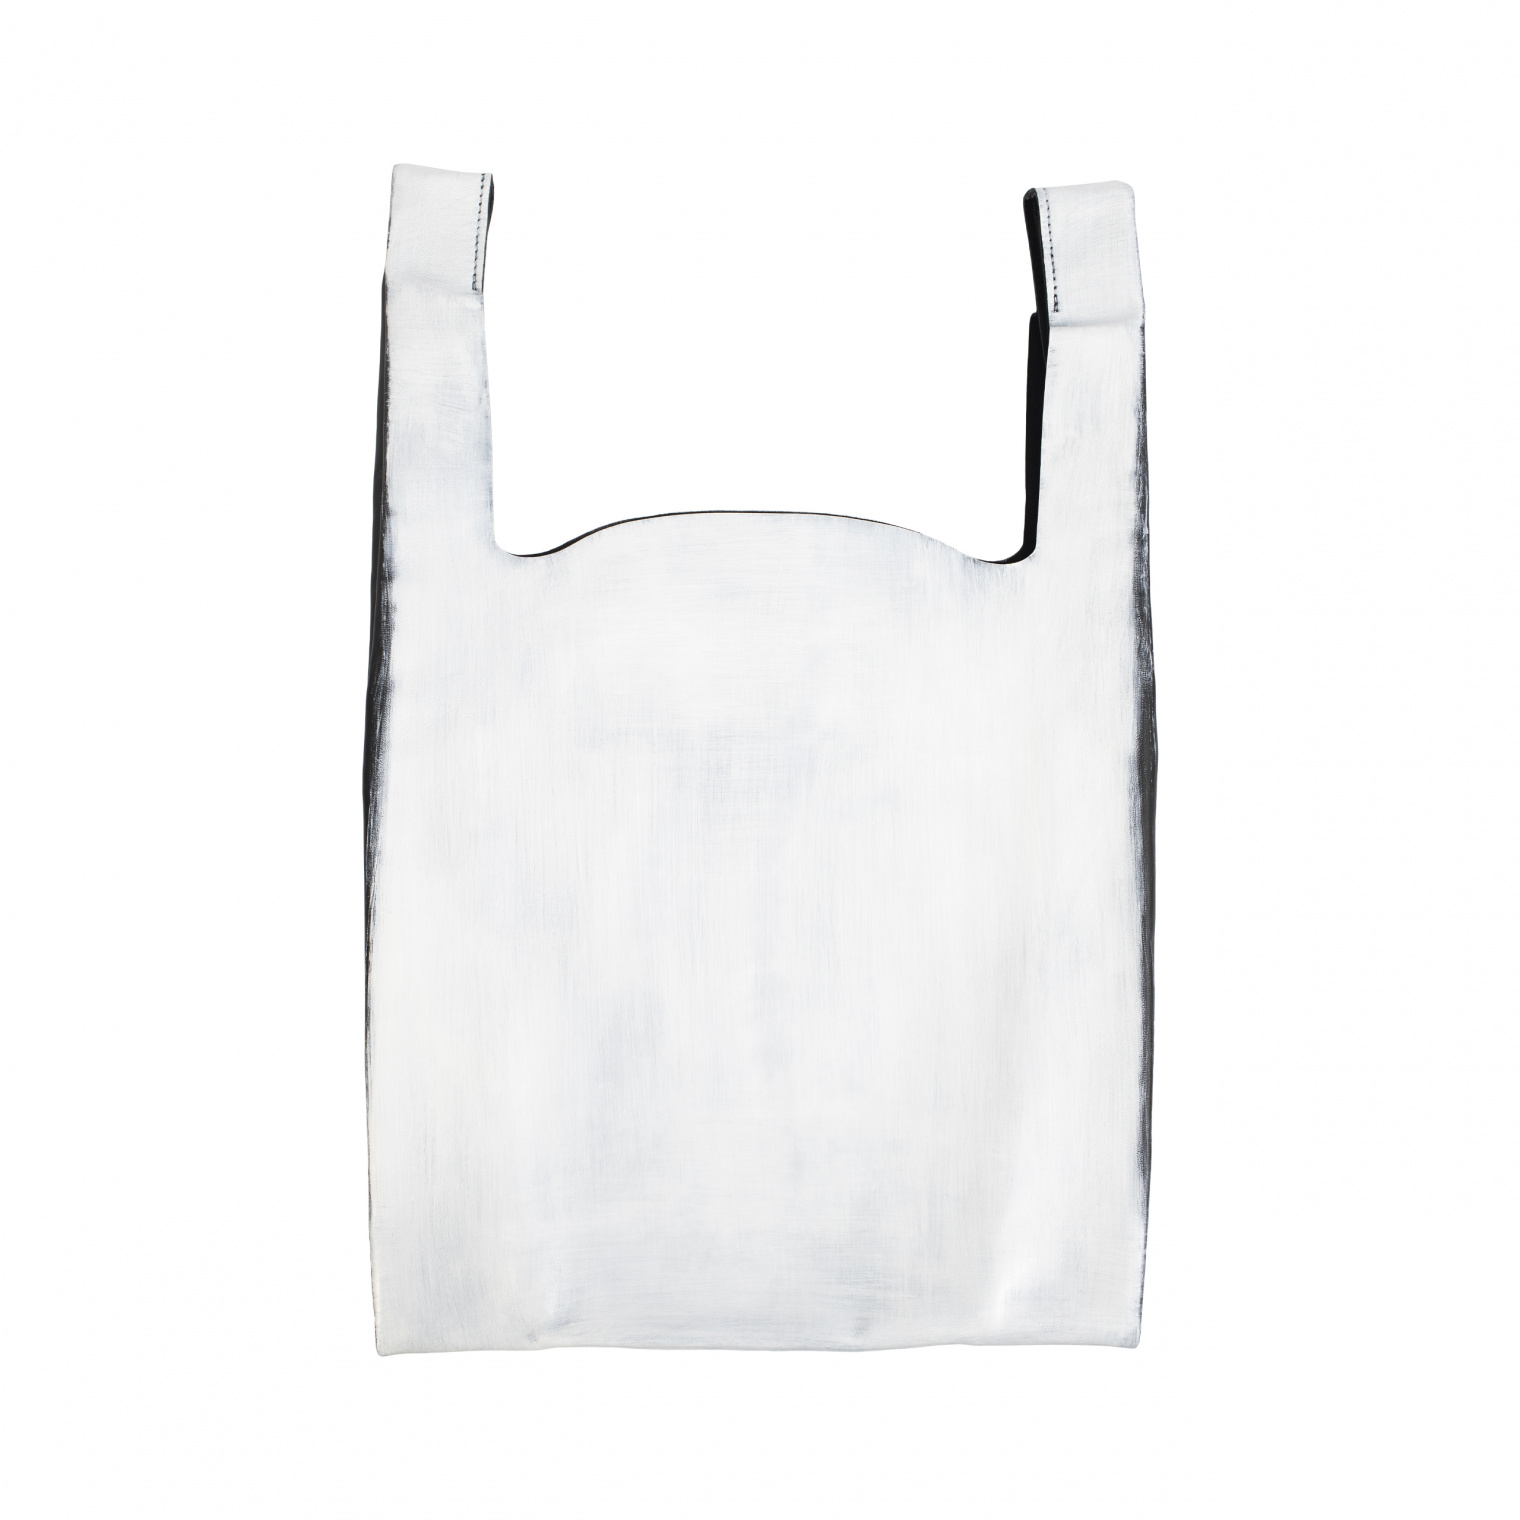 Maison Margiela Bianchetto Painted Leather Tote Bag